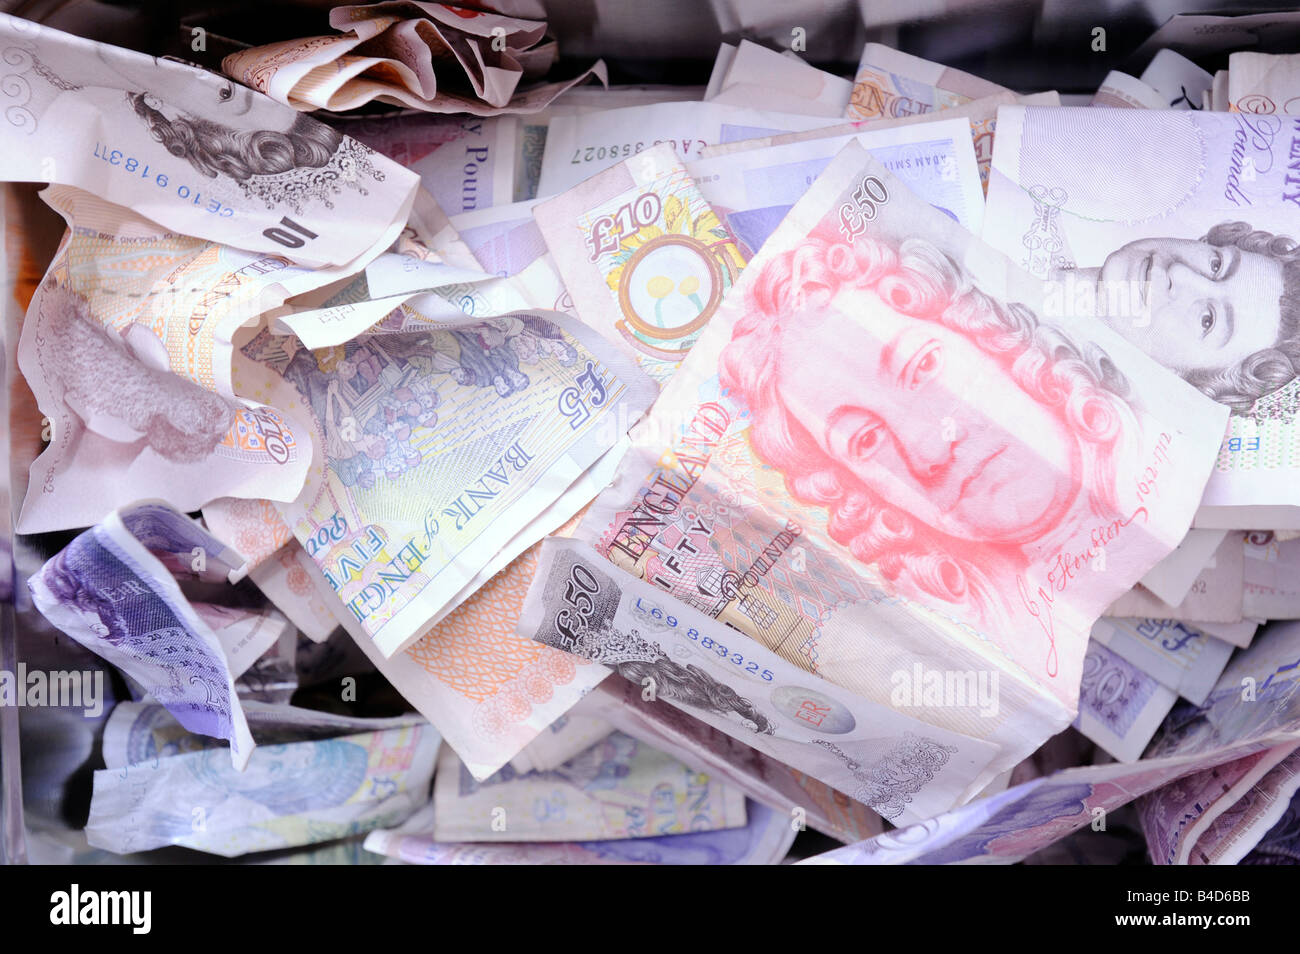 Unsorted pile of English Bank Notes. Stock Photo